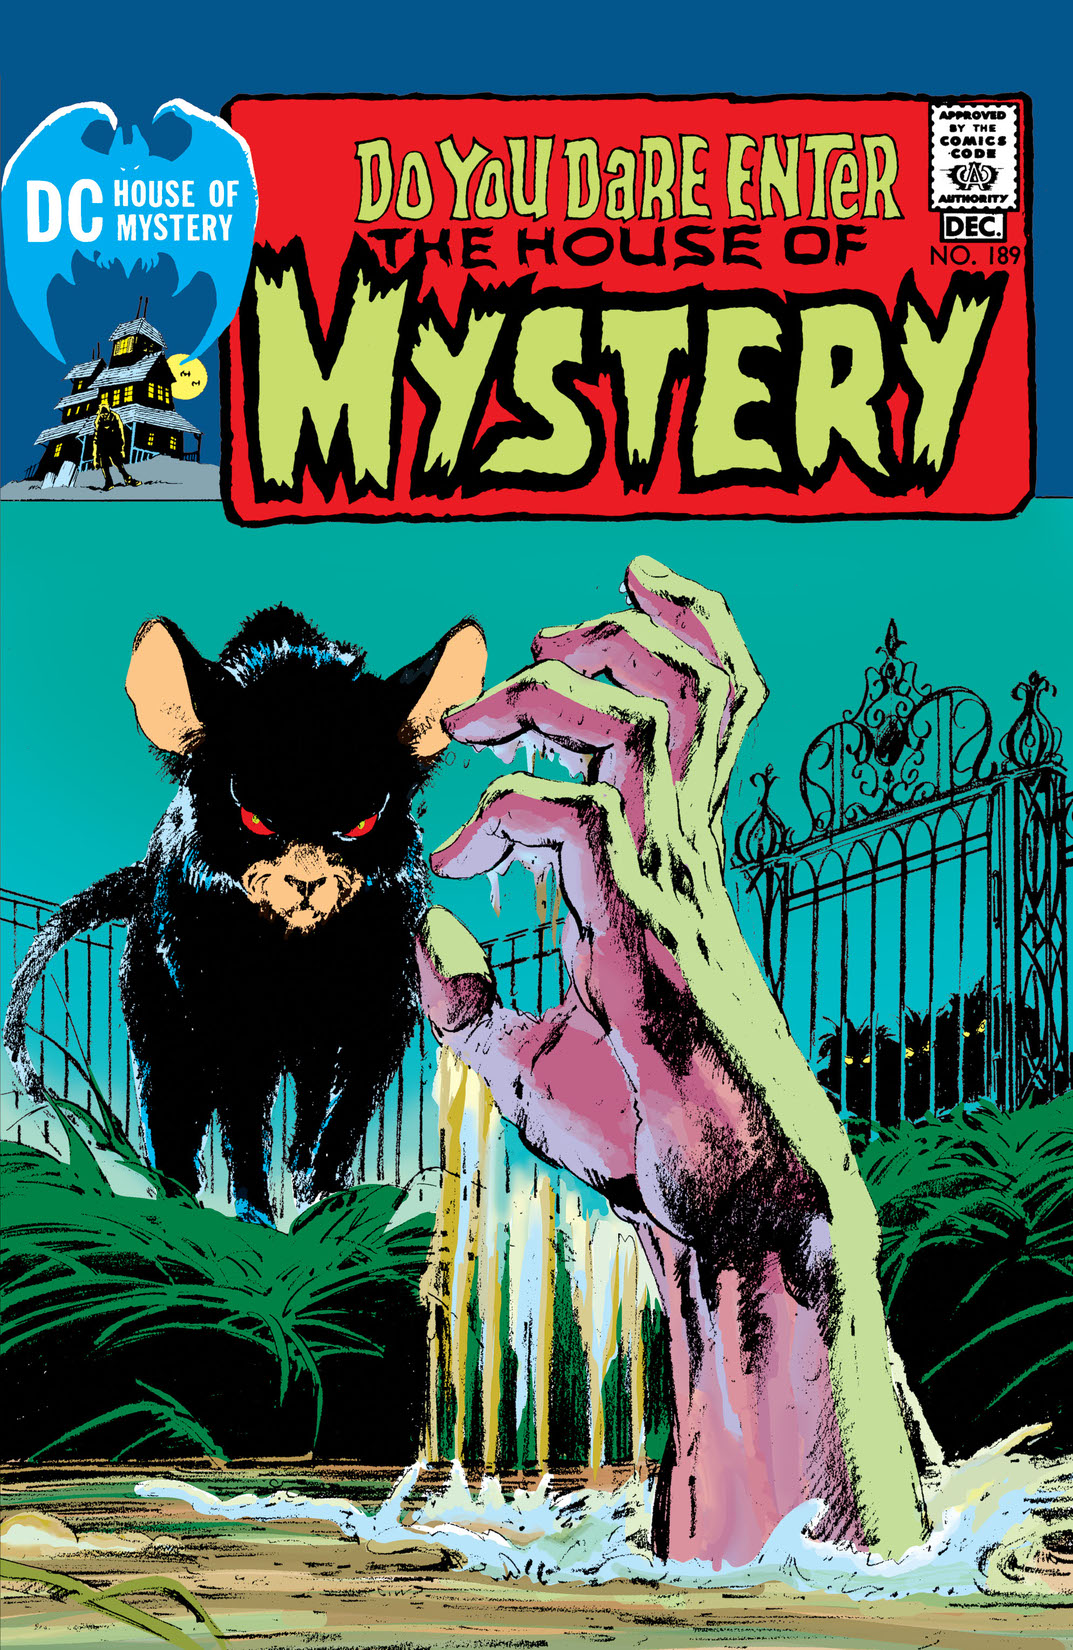 House of Mystery (1951-) #189 preview images